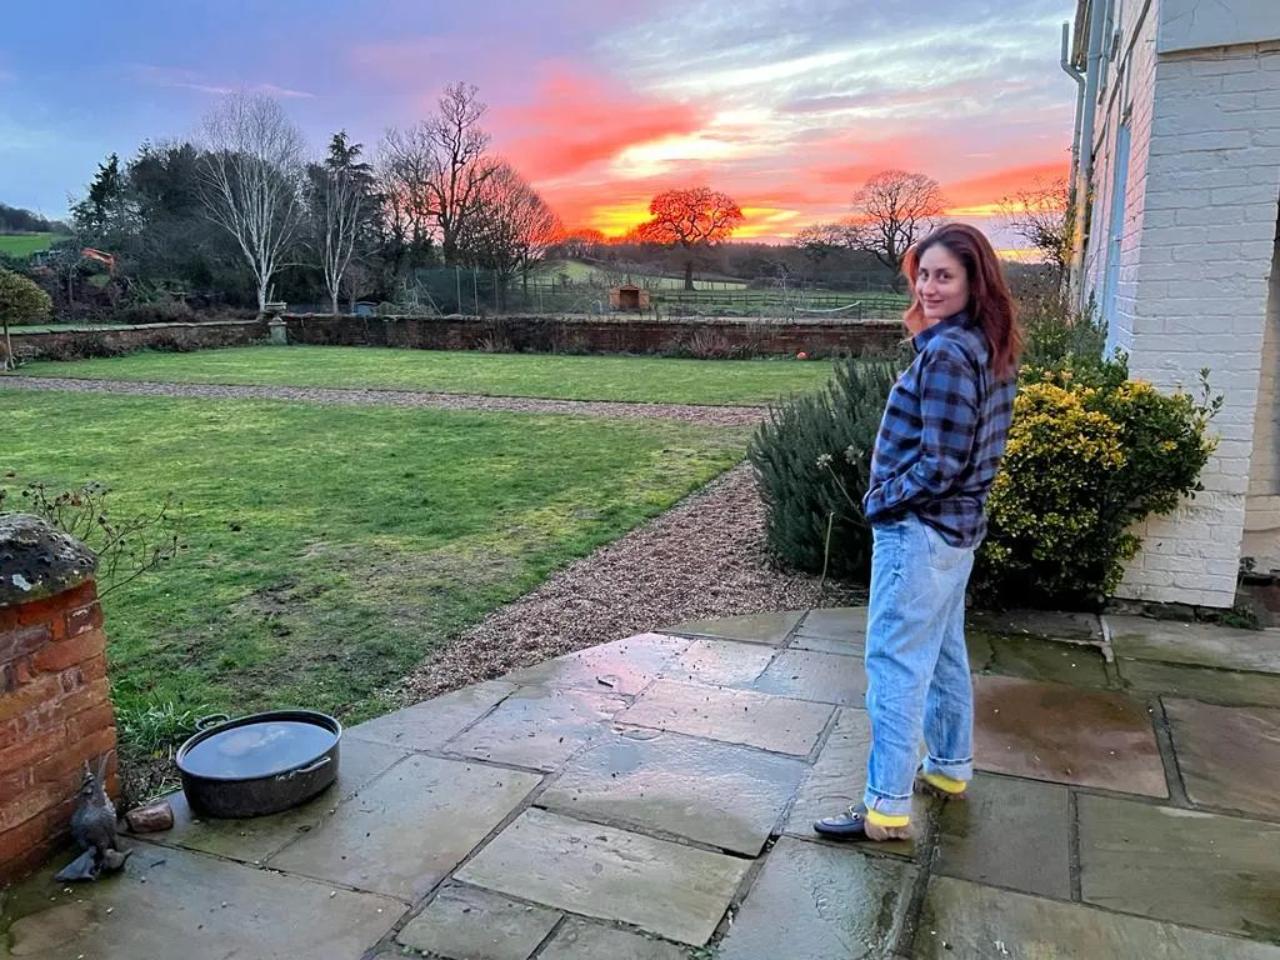 Kareena Kapoor Khan spent the past week in Gstaad in Switzerland along with husband Saif Ali Khan and their kids, Taimur and Jeh. On the eve of New Year, Kareena shared a picture of herself posing in the backdrop of a beautiful sunset. Sharing the picture, the actress wrote, 